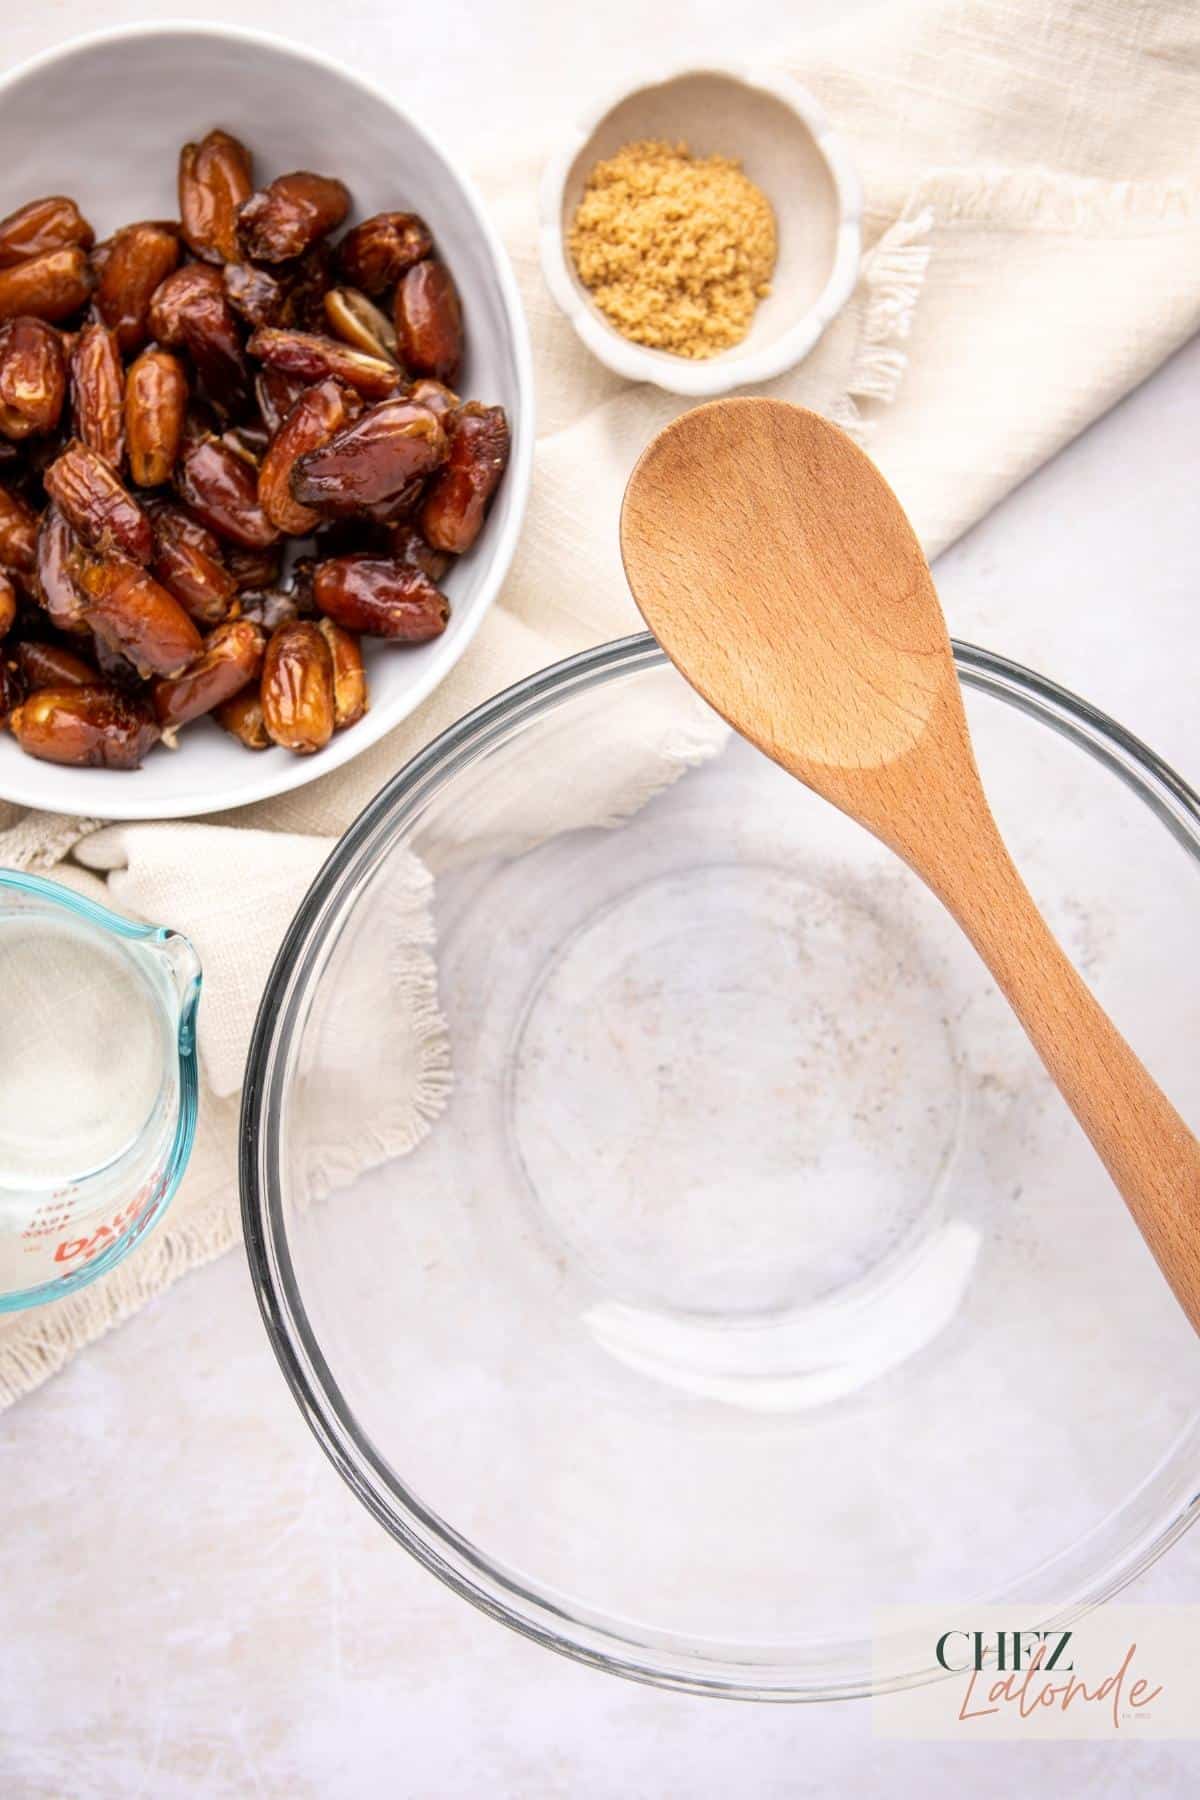 A bowl of dates, a glass mixing bowl, and a wooden spoon on a table.